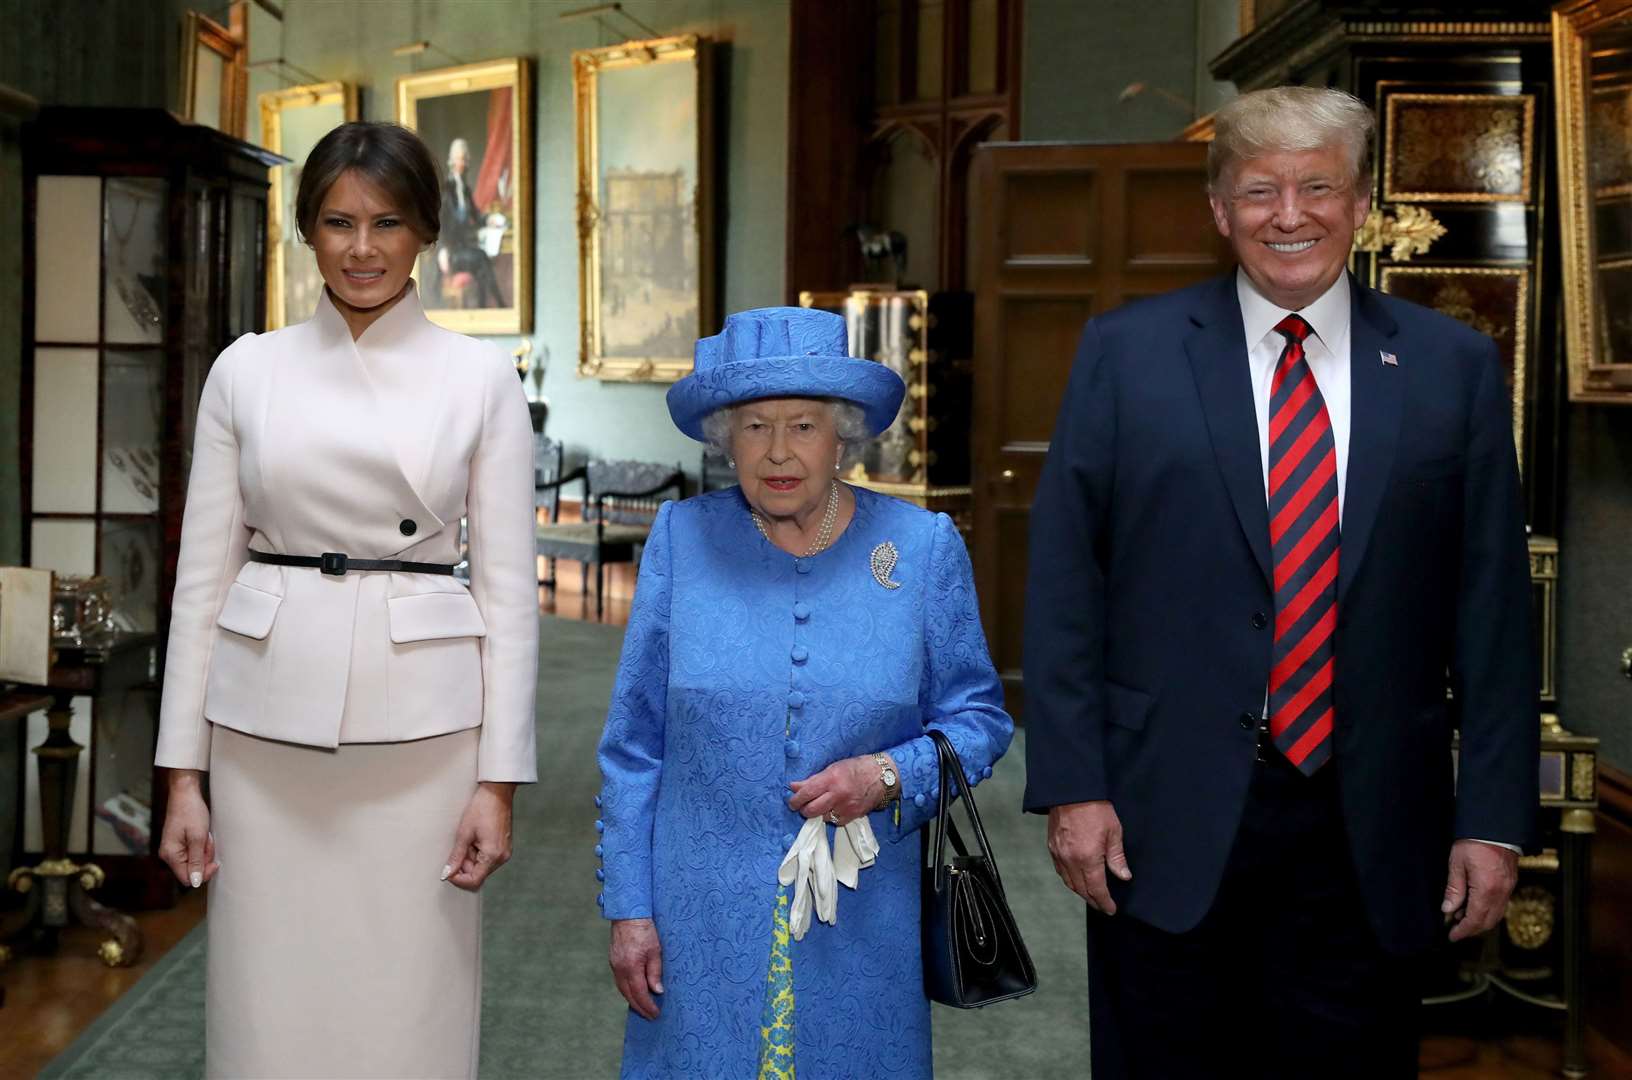 The Queen with then US president Donald Trump and his wife Melania at Windsor in 2018 (Steve Parsons/PA)